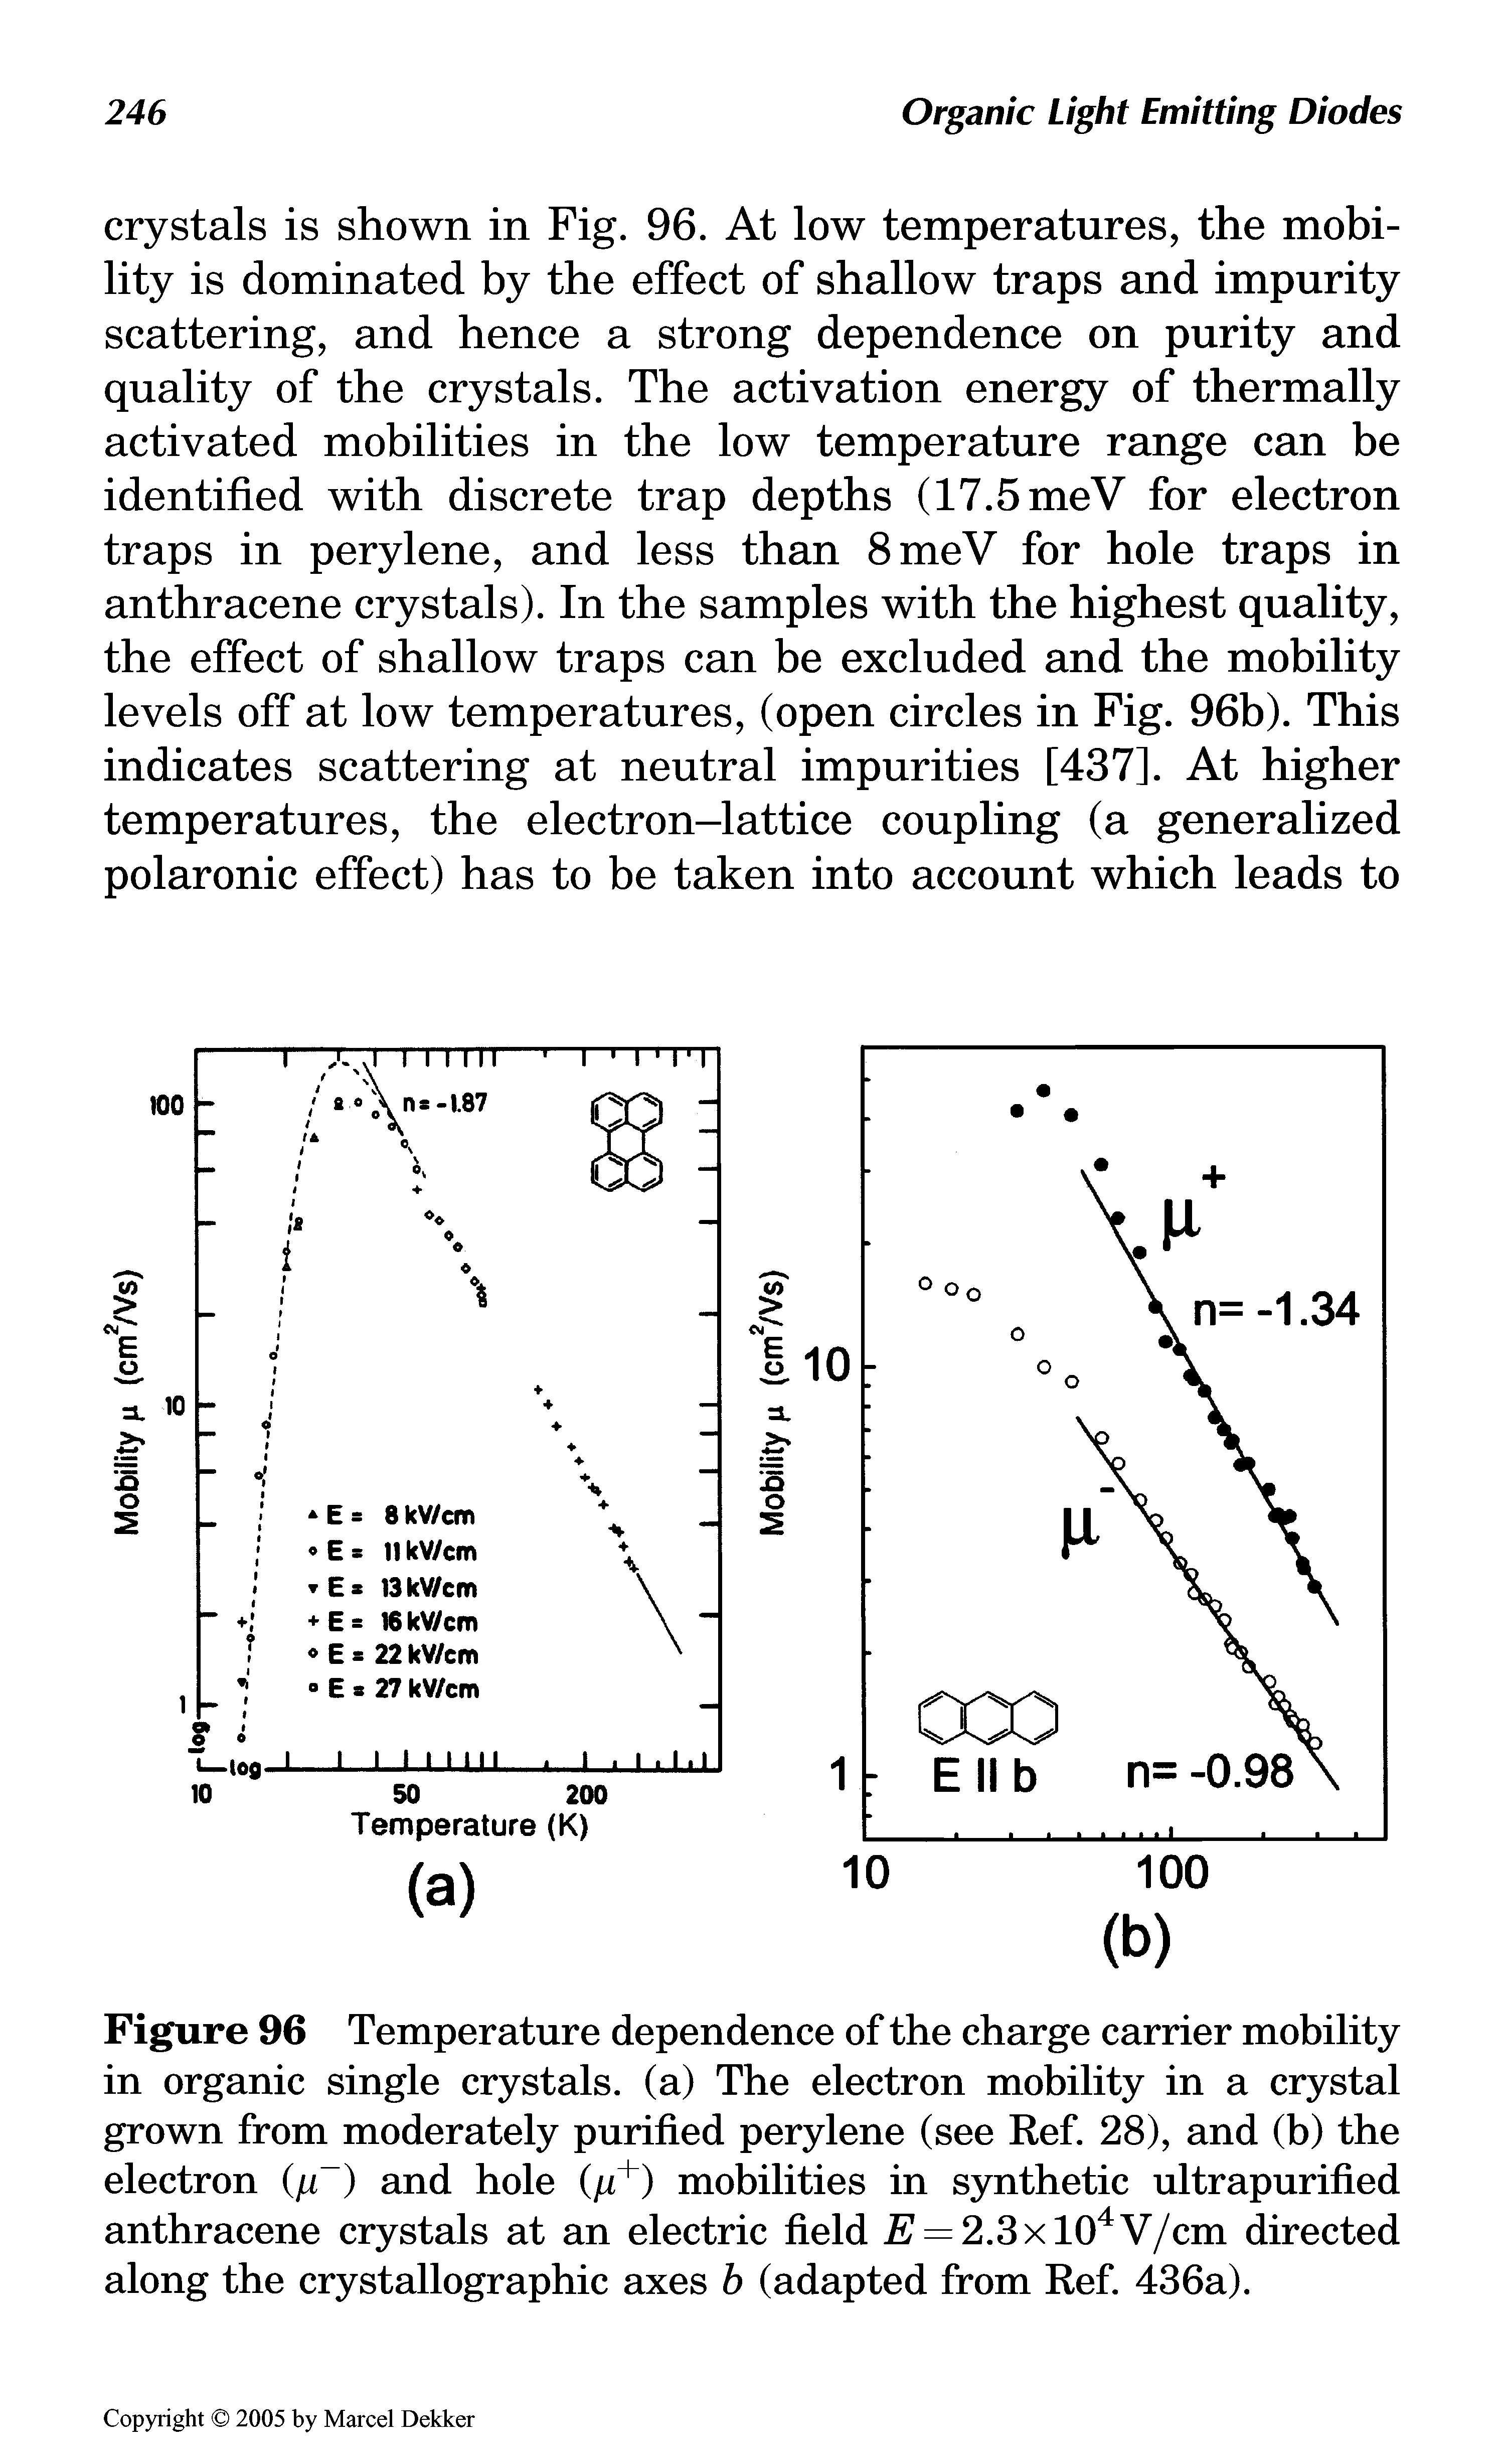 Figure 96 Temperature dependence of the charge carrier mobility in organic single crystals, (a) The electron mobility in a crystal grown from moderately purified perylene (see Ref. 28), and (b) the electron (/ ) and hole (// ) mobilities in synthetic ultrapurified anthracene crystals at an electric field E 2.3x10 V/cm directed along the crystallographic axes b (adapted from Ref. 436a).